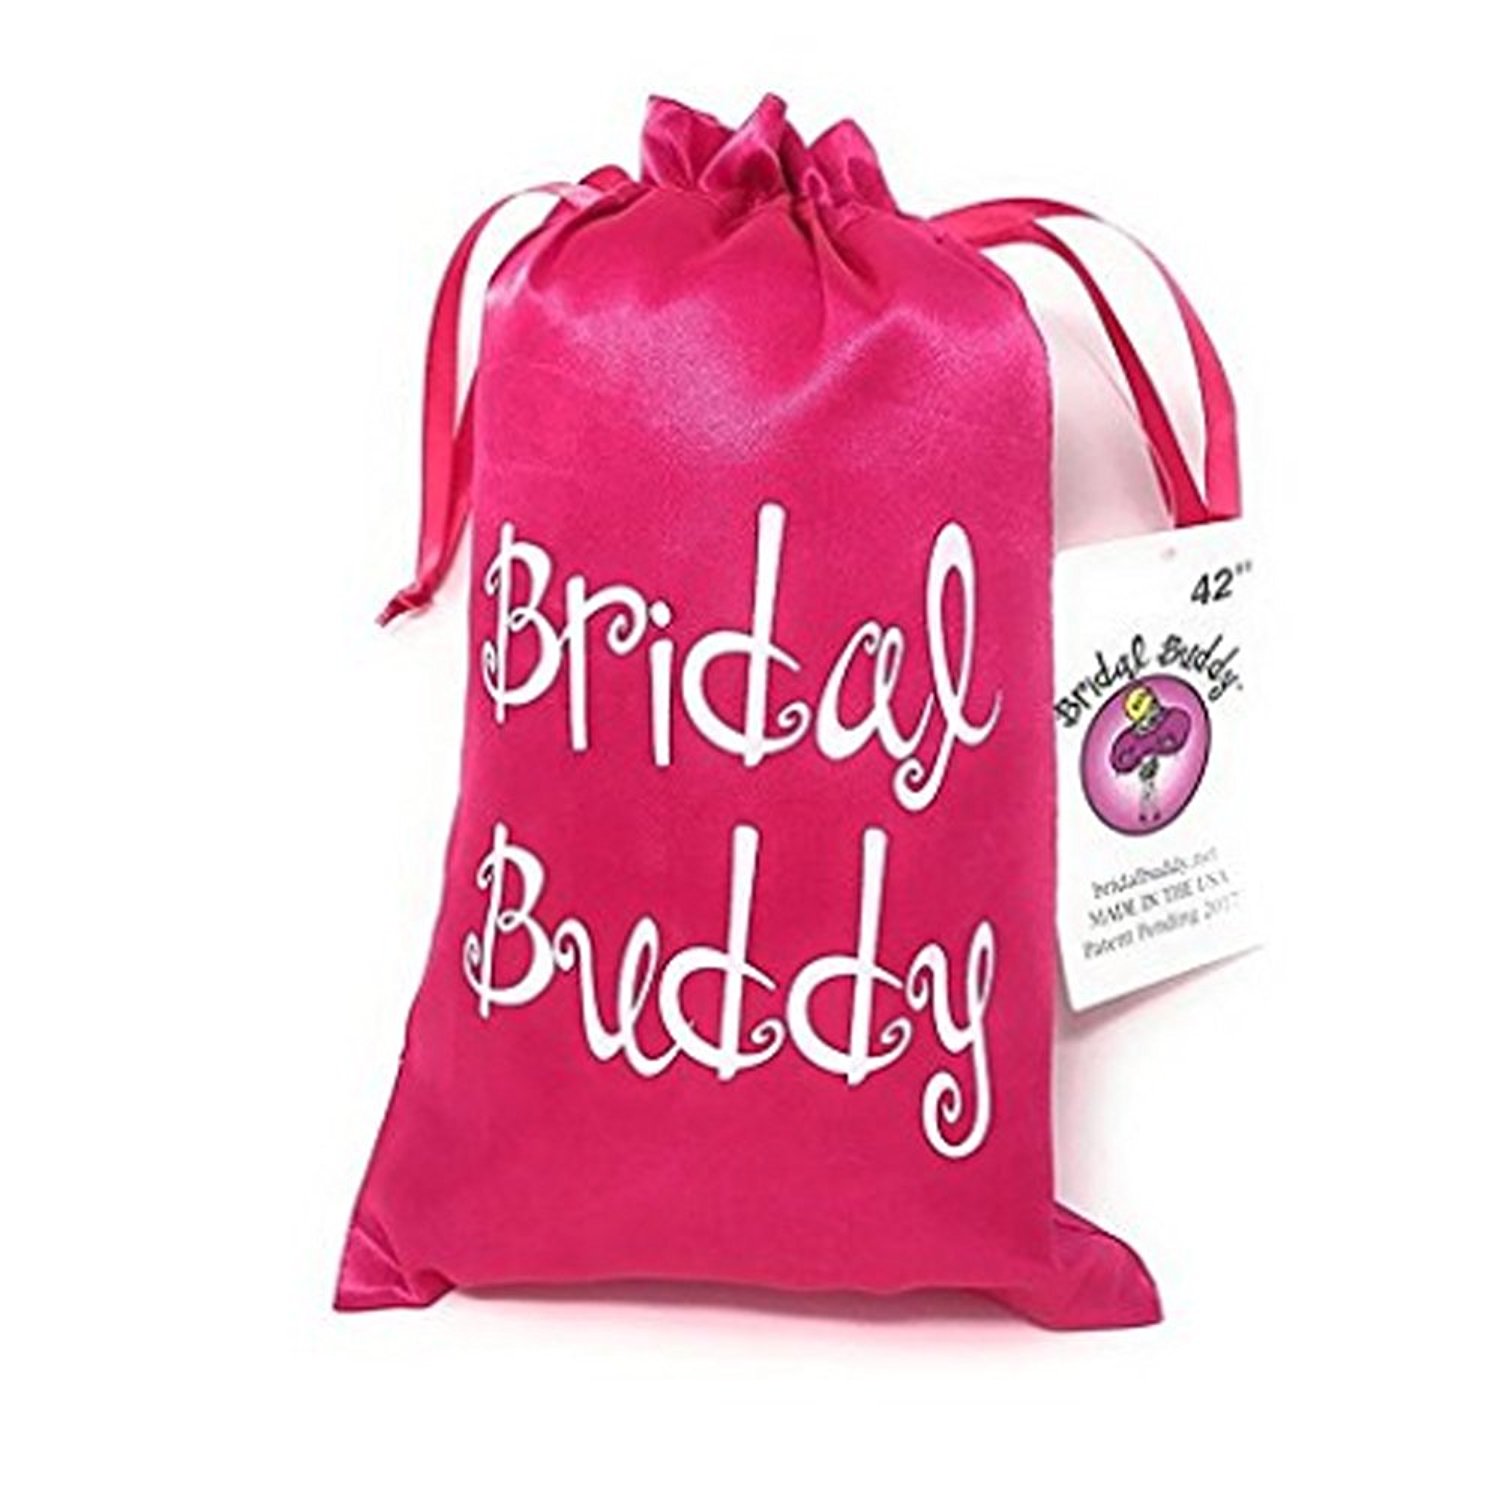 Bridal Buddy: Use the Bathroom in Your Wedding Gown on Your Own